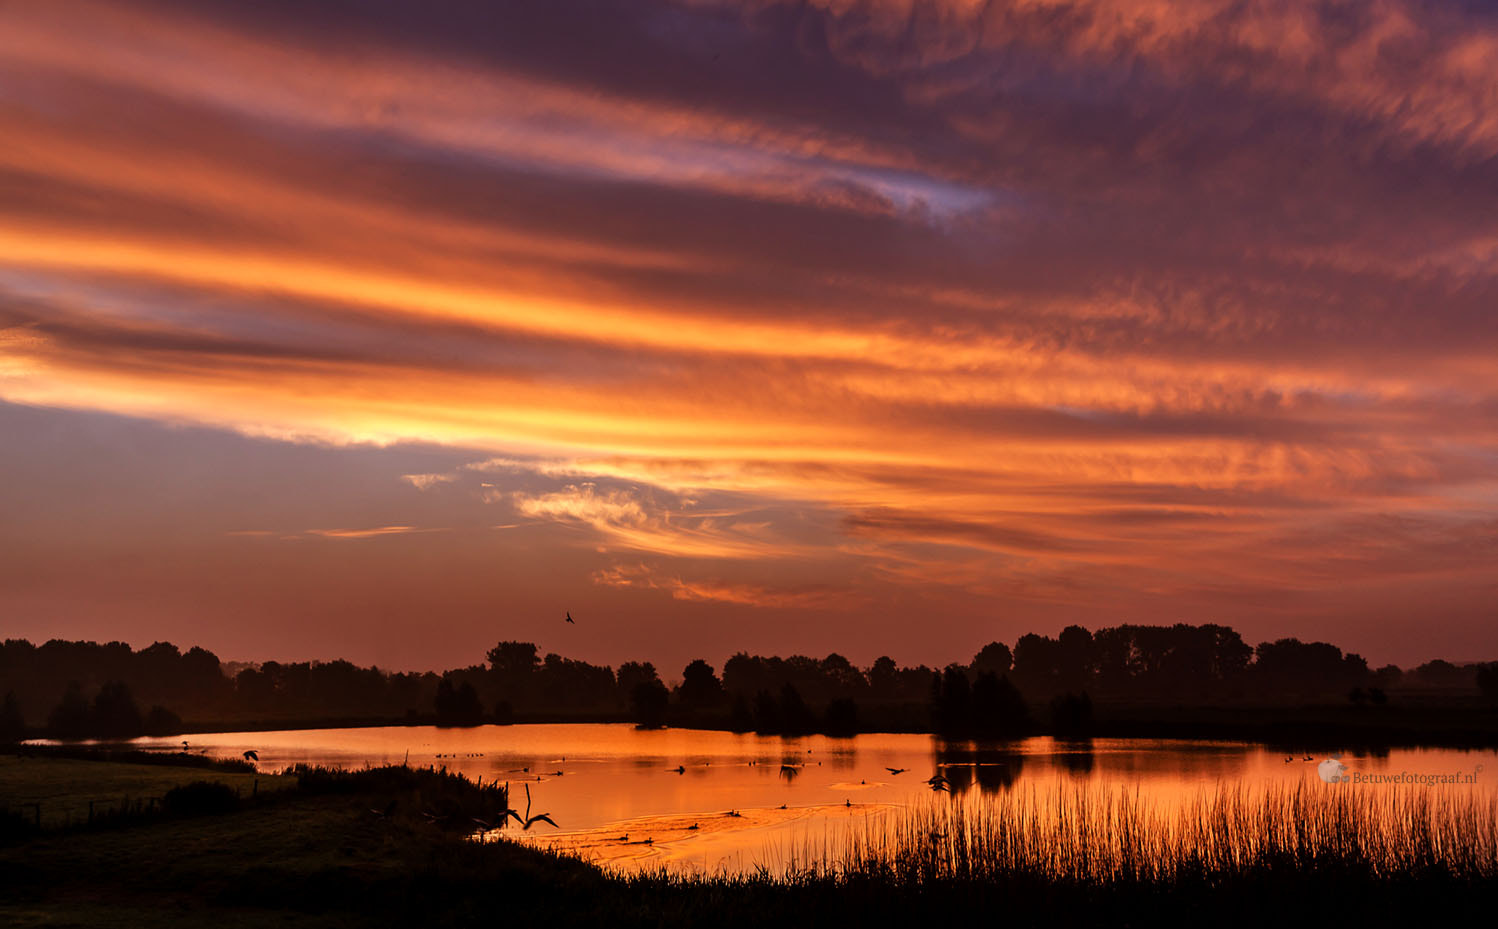 Canon EOS 5D Mark II + Sigma 24-105mm f/4 DG OS HSM | A sample photo. The sky is on fire...... photography